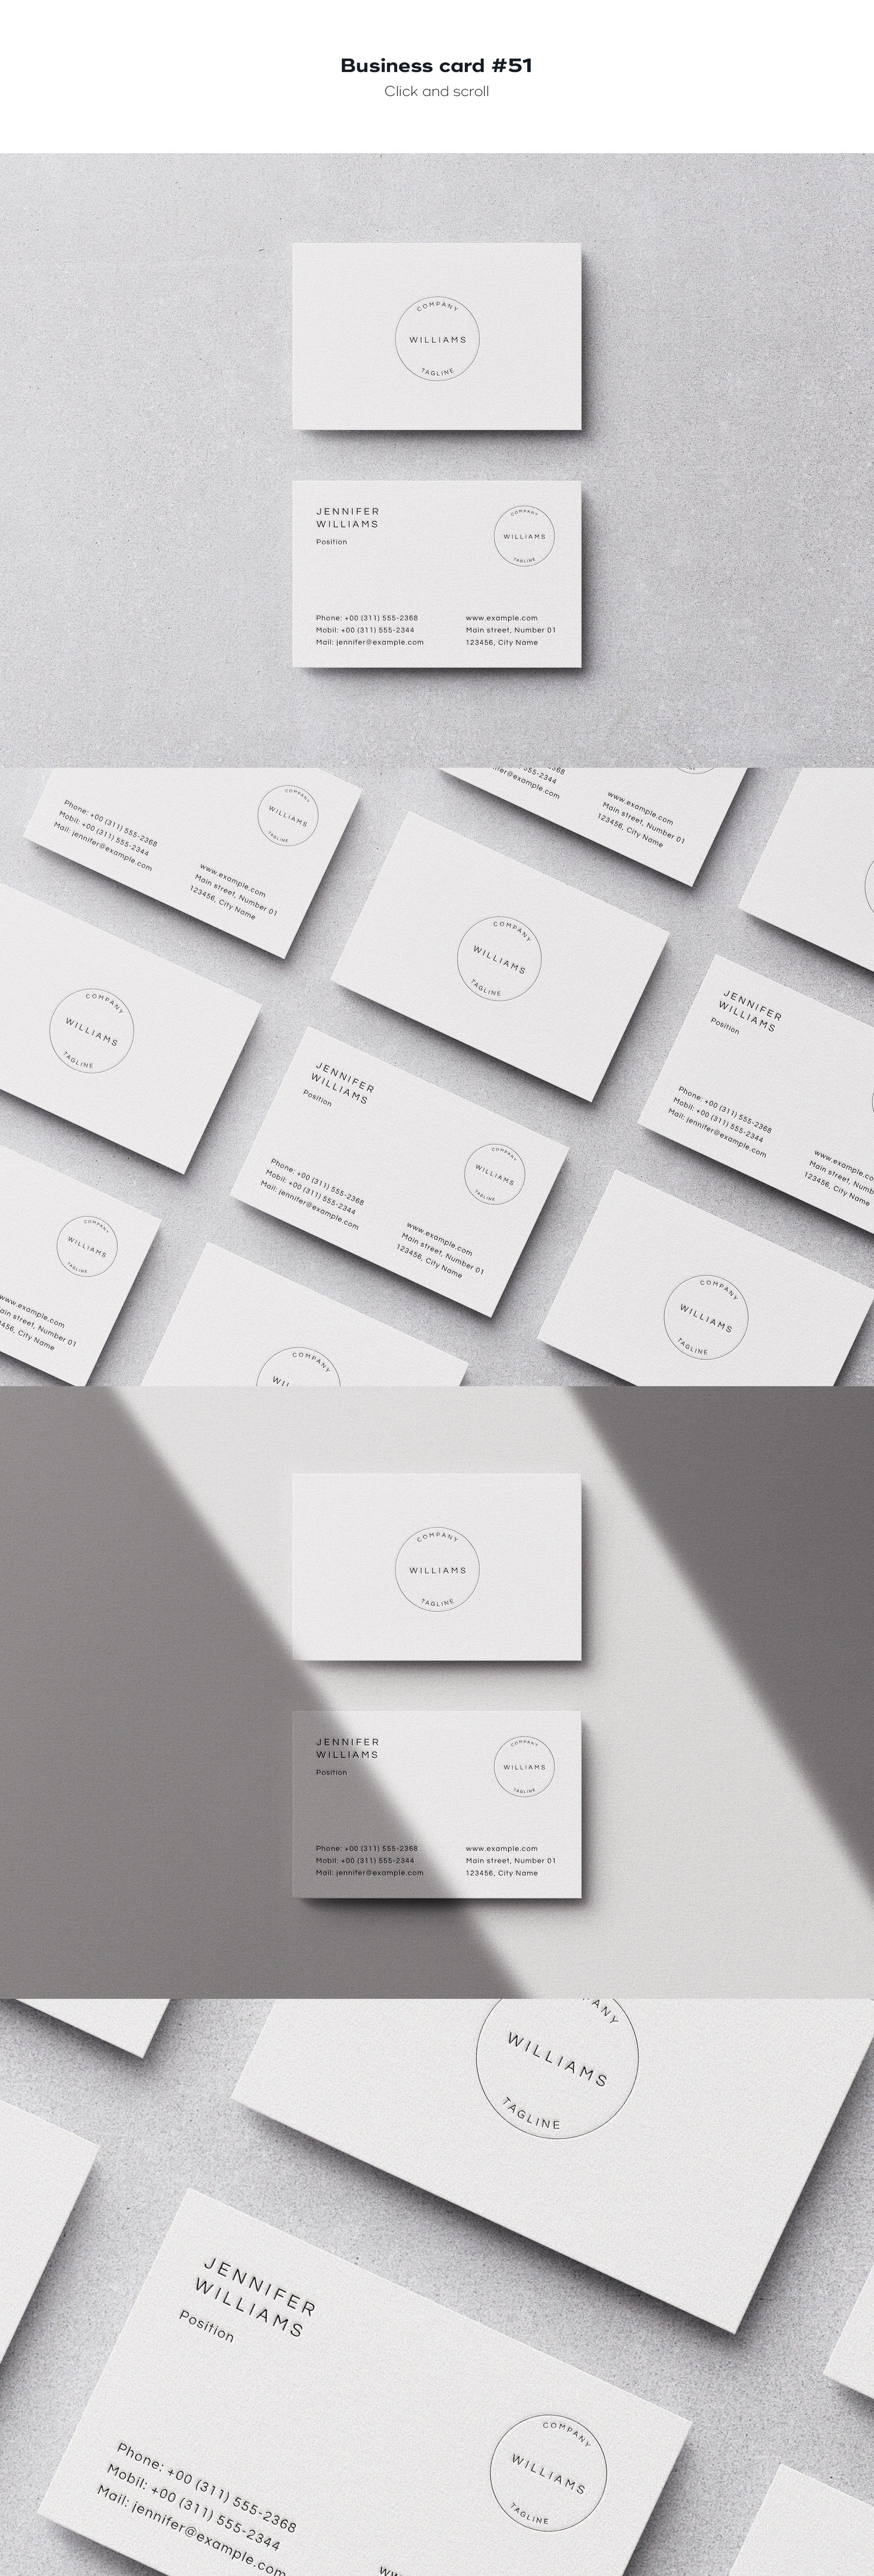 business card 51 164